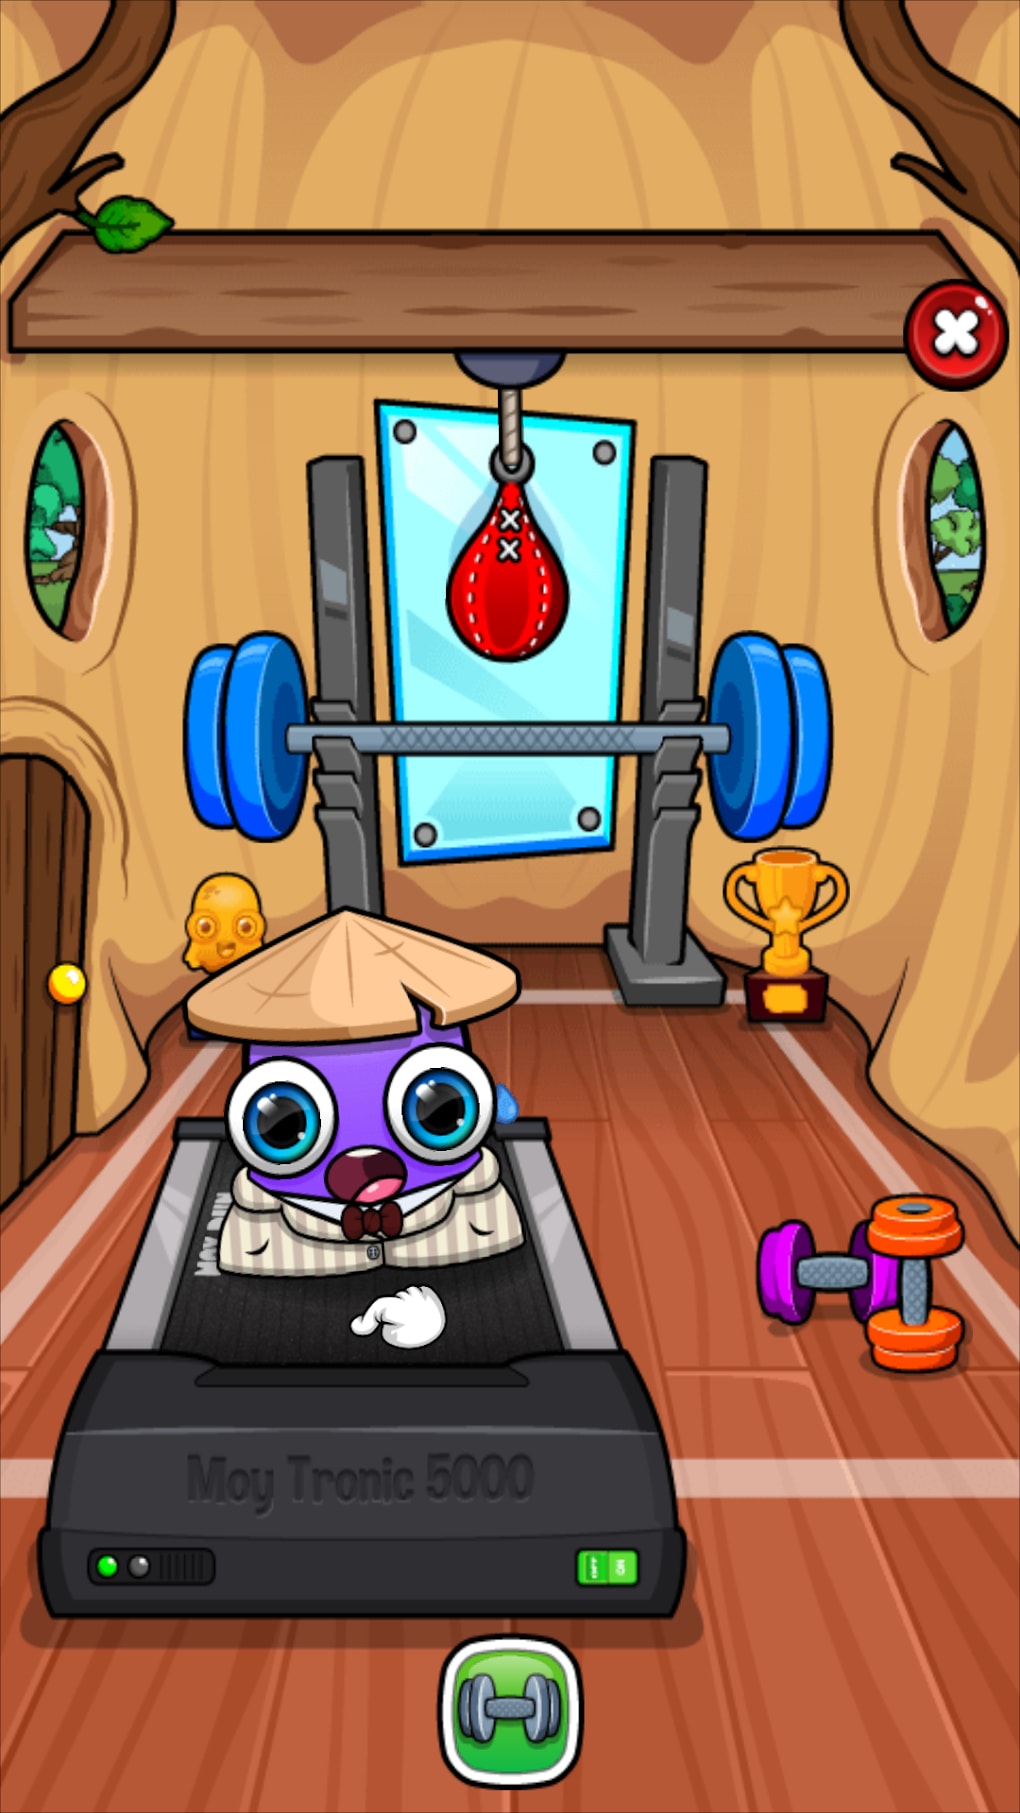 Download Moy 7 the Virtual Pet Game on PC with MEmu